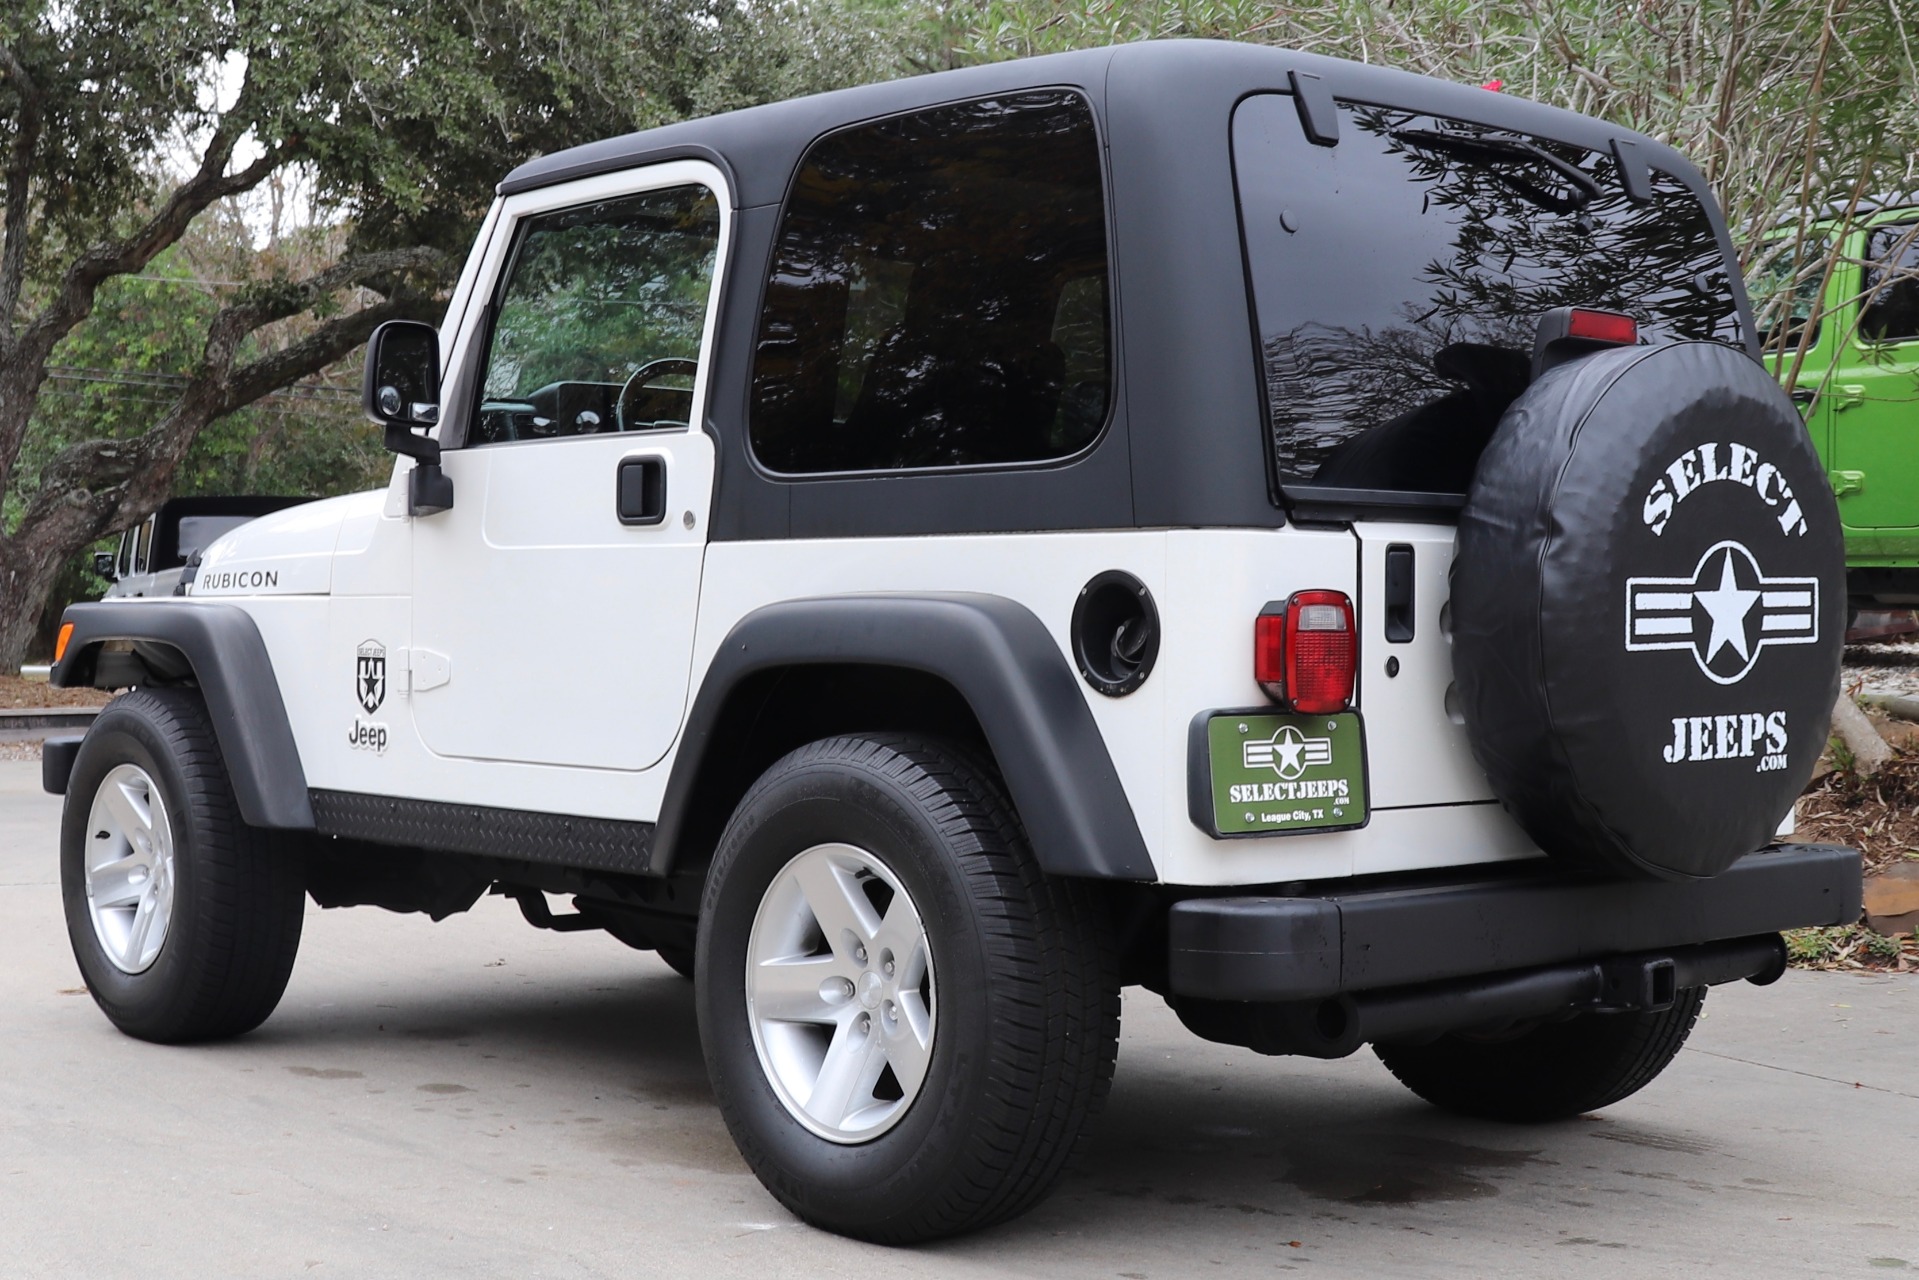 Used 2003 Jeep Wrangler Rubicon For Sale ($18,995) | Select Jeeps Inc.  Stock #338812